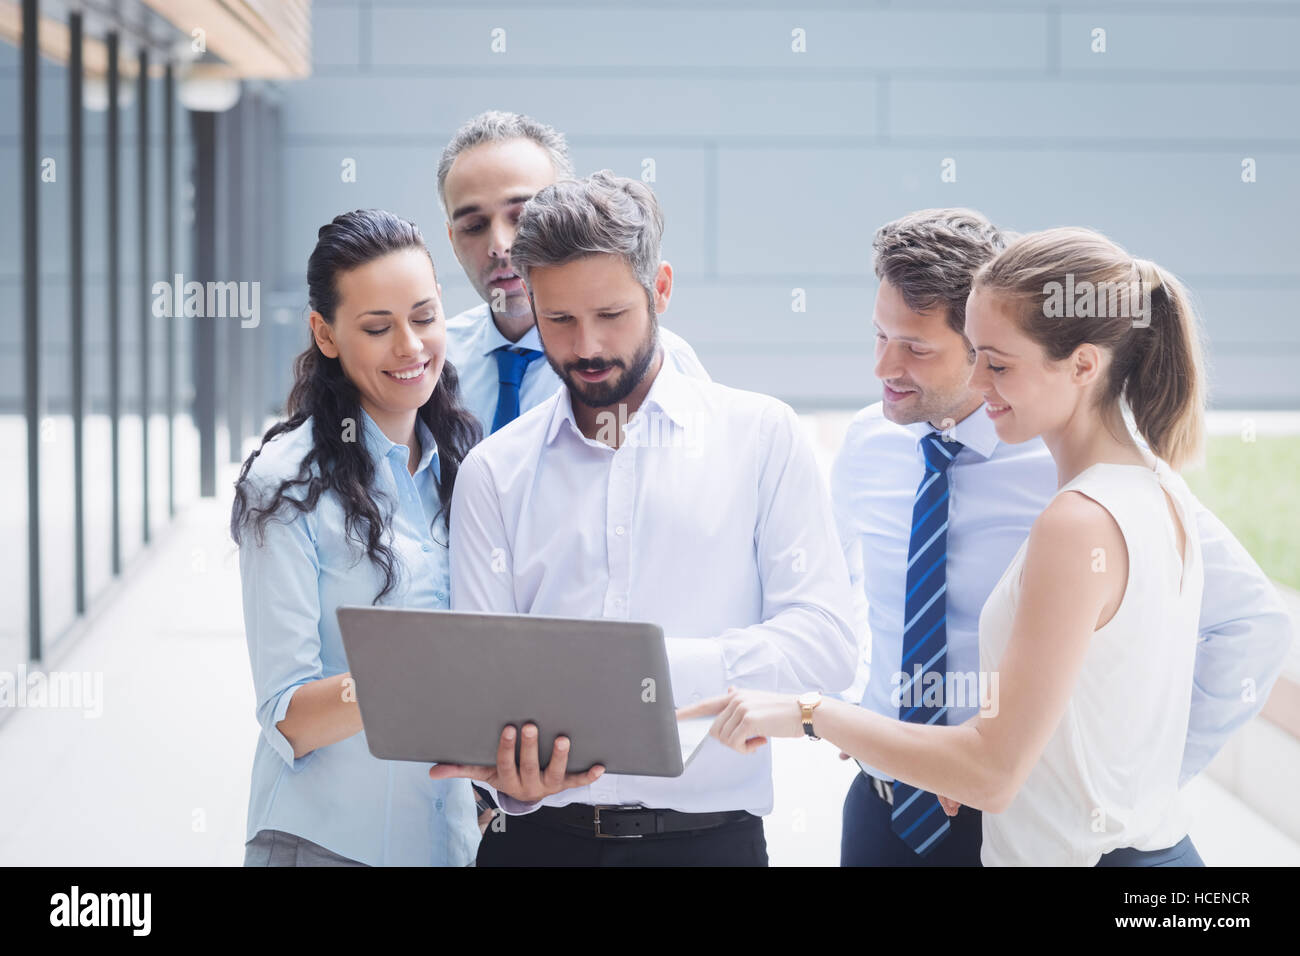 Businesspeople discussing over laptop Stock Photo